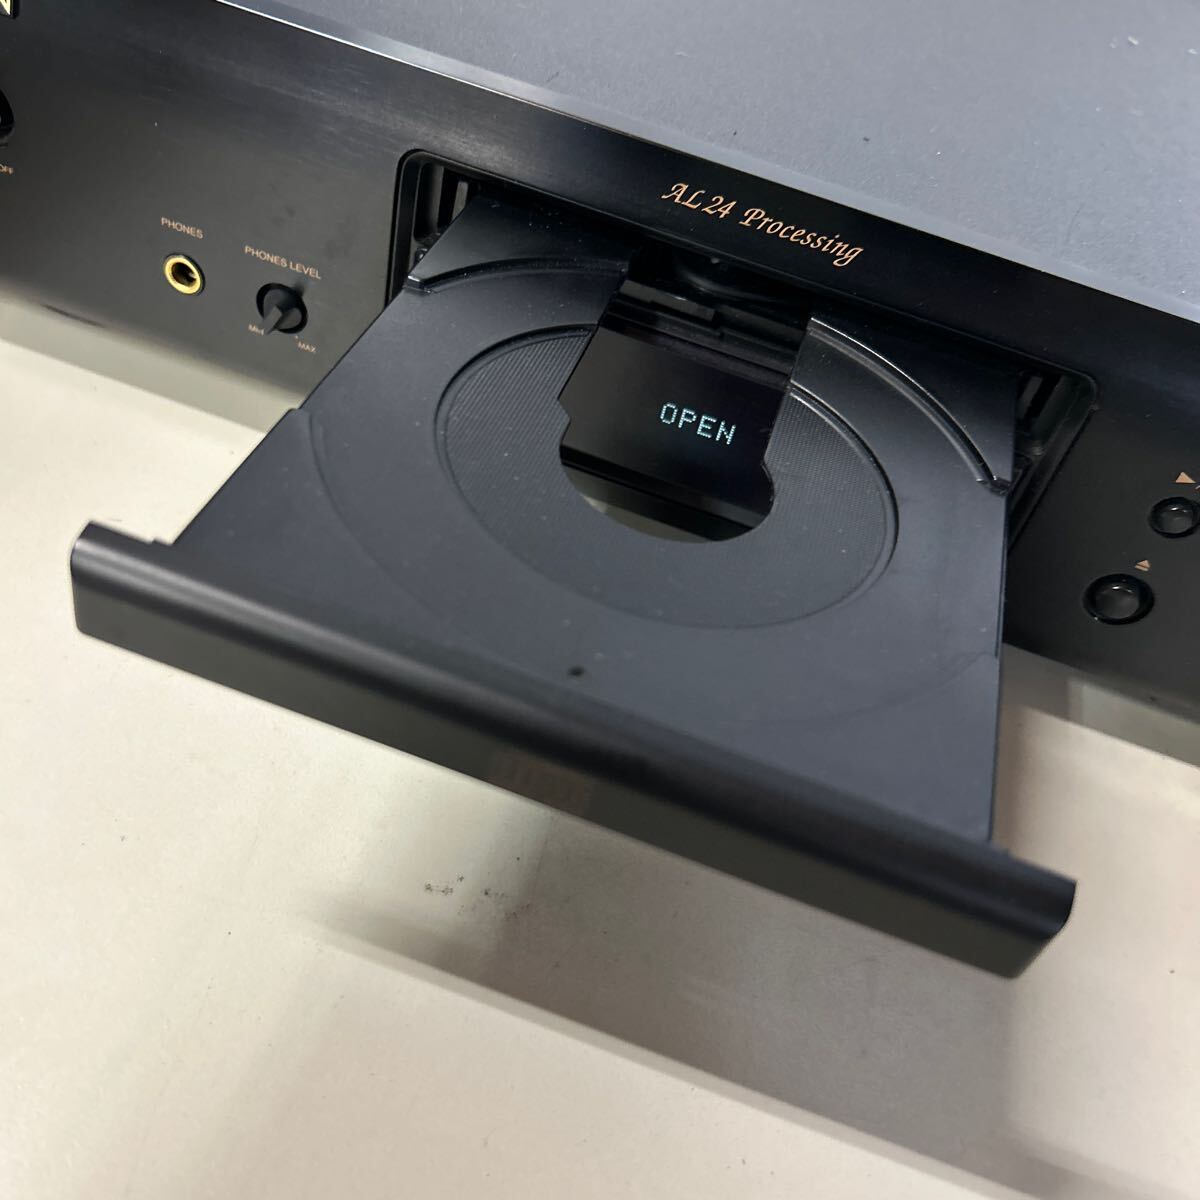 DENON DCD-755AE Denon CD player electrification OK tray is your own convenience go out .. Junk 